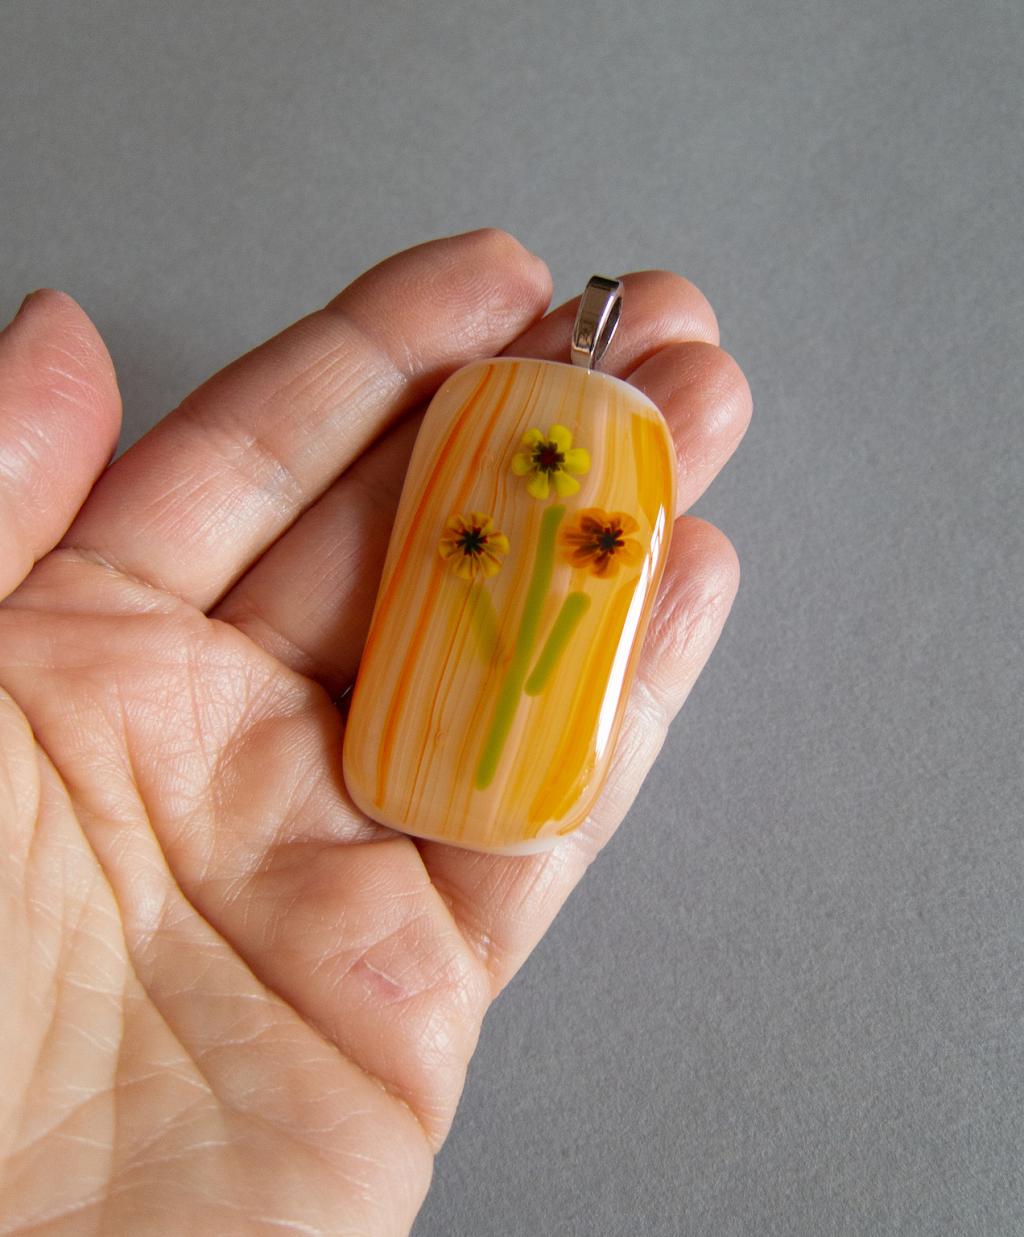 a close up picture of a hand holding a pendant made of fused glass. glass is in a floral pattern with an orange tonal striped background. 